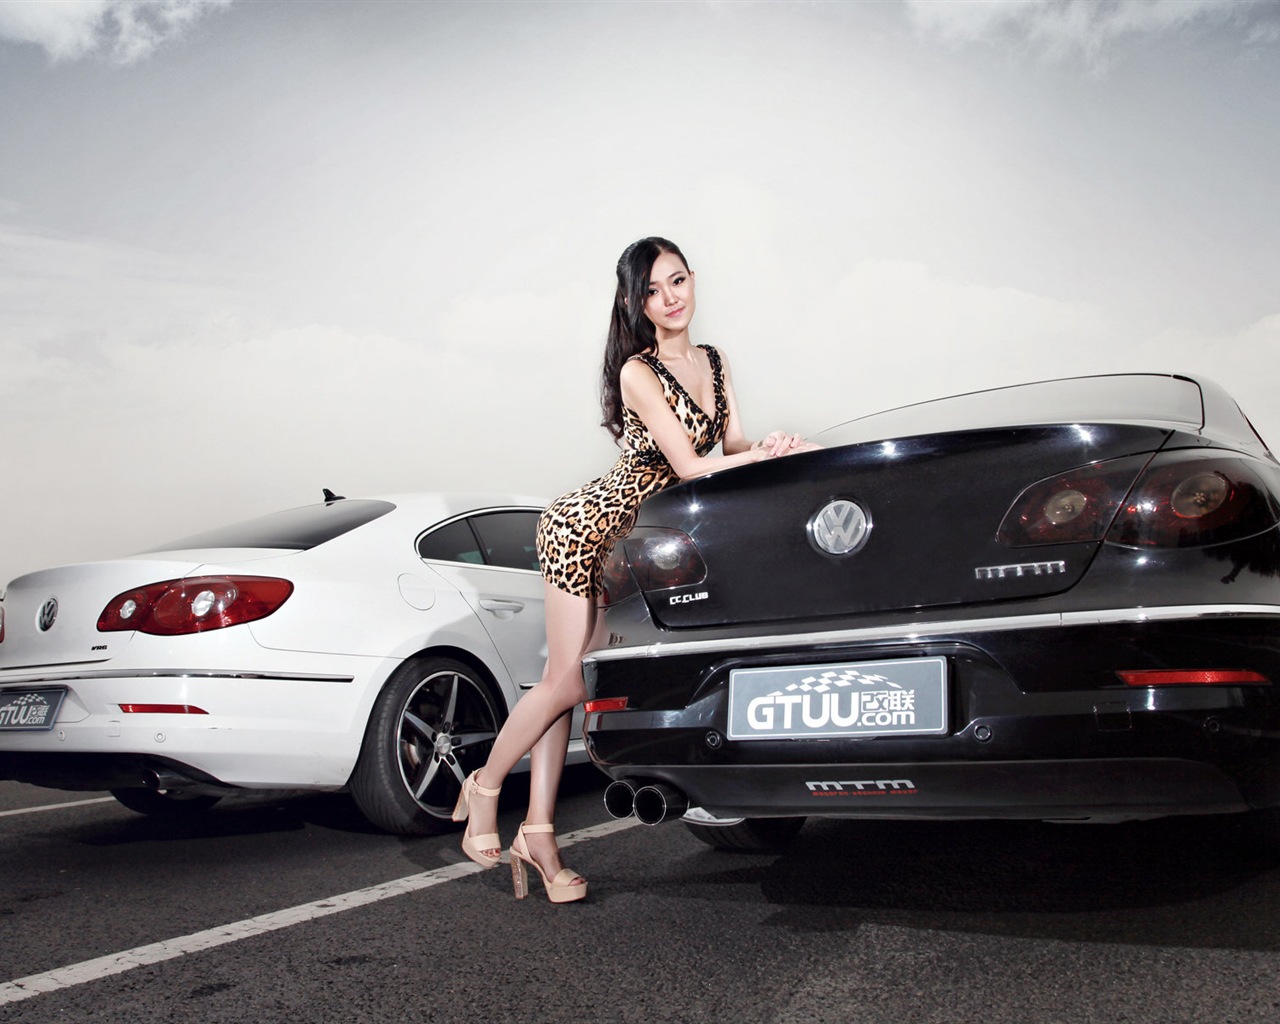 Beautiful leopard dress girl with Volkswagen sports car wallpapers #7 - 1280x1024